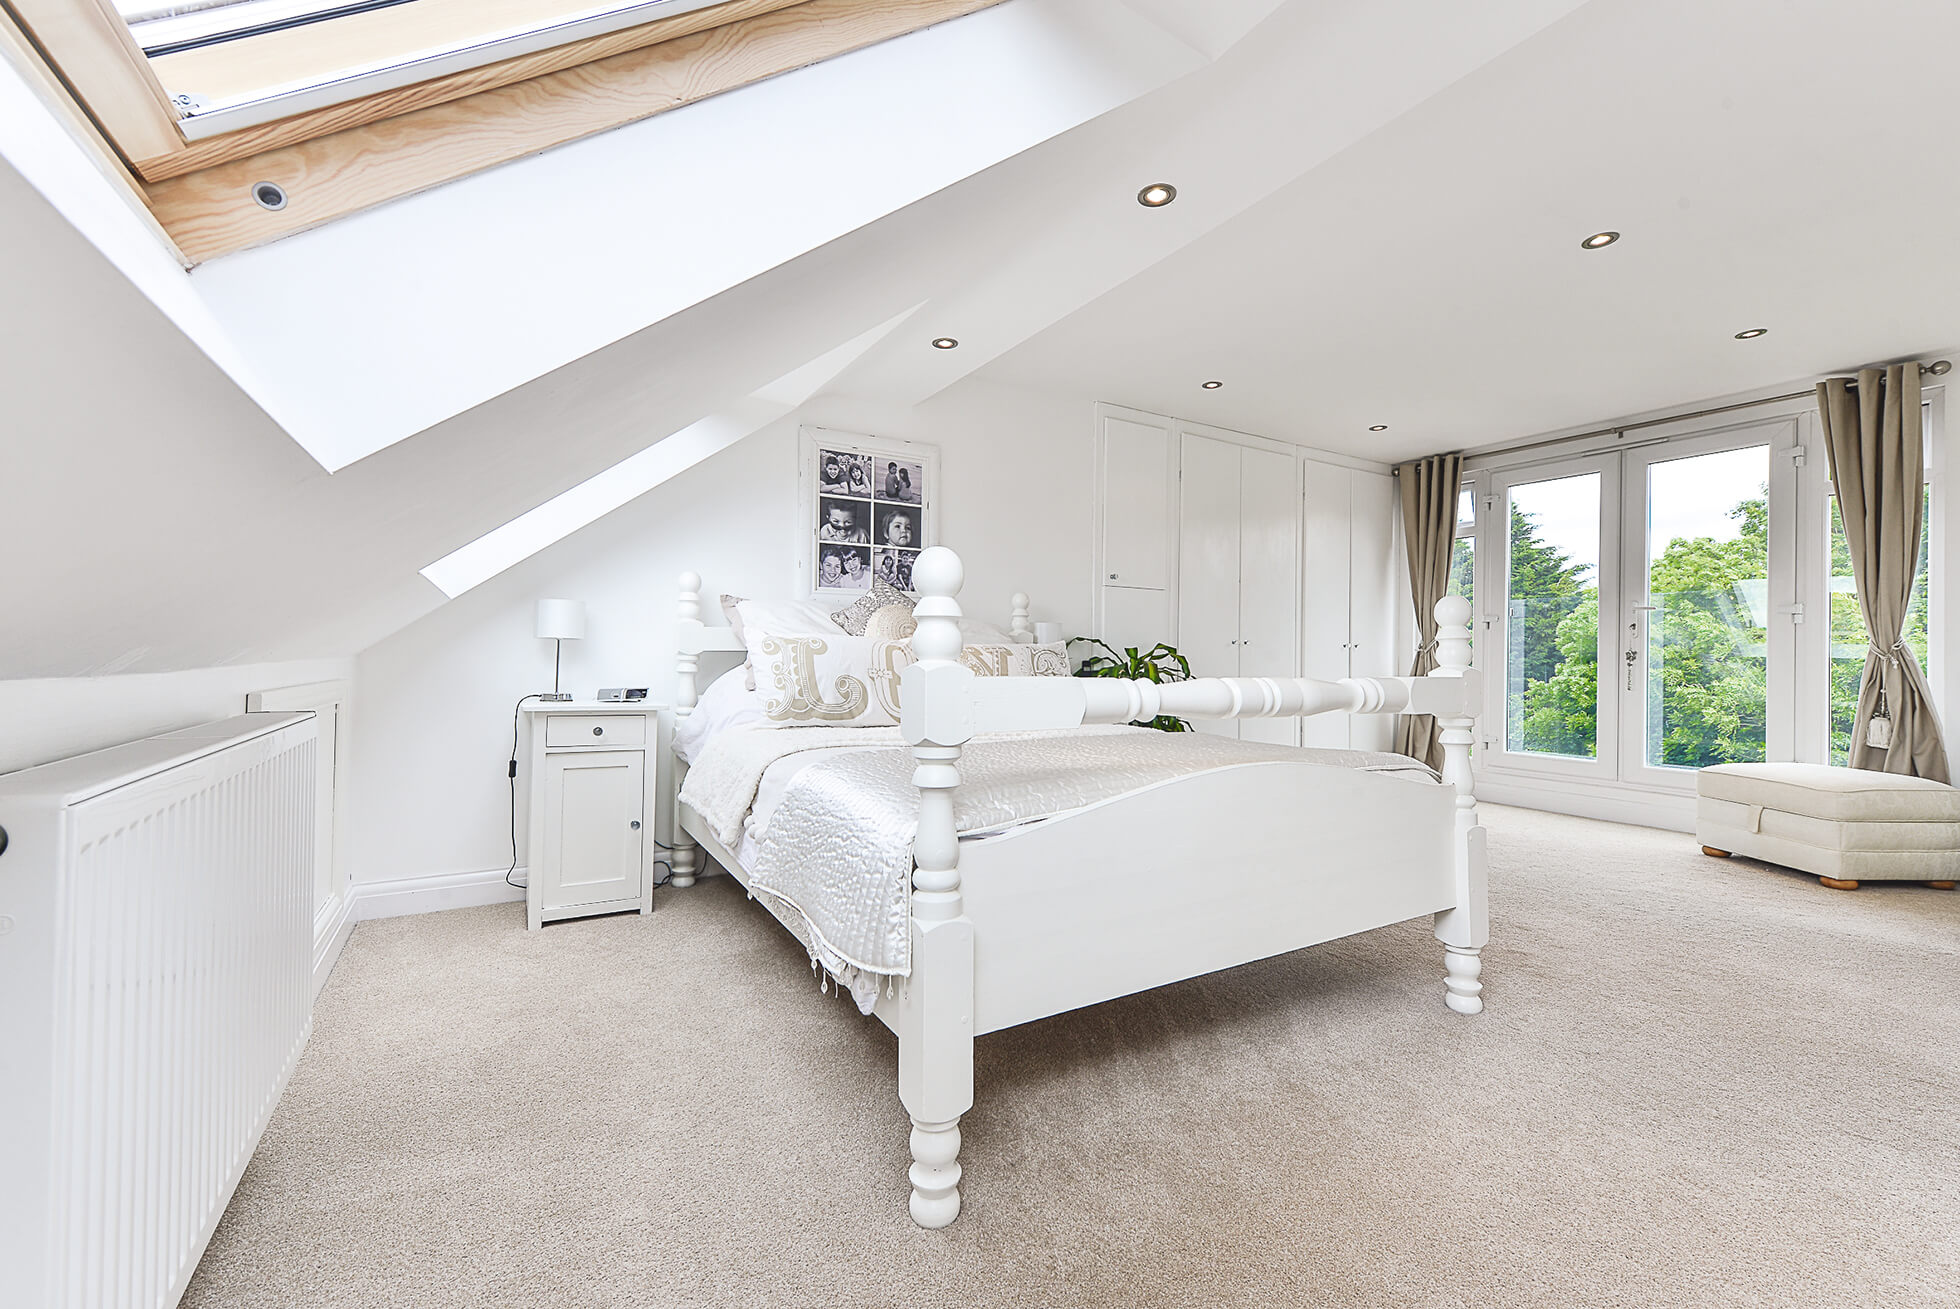 Do you have a question about converting your Loft in Anstey? Here are the most popular questions asked by our clients.